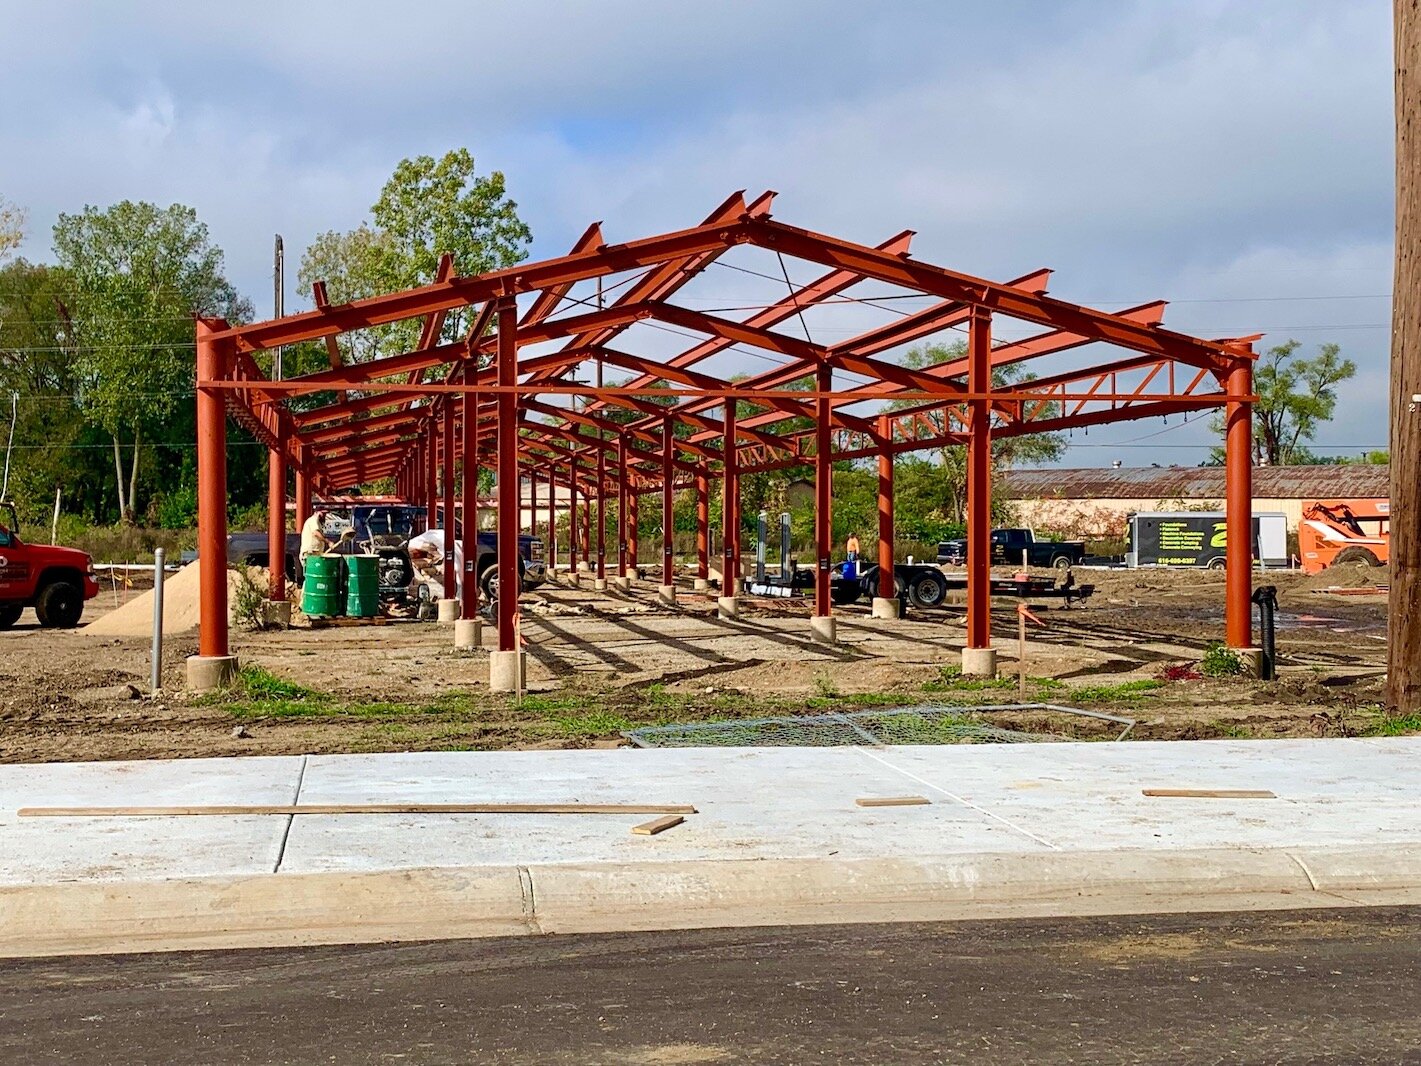 Construction continues on Kalamazoo Farmers Market in the 1500 block of Bank Street.